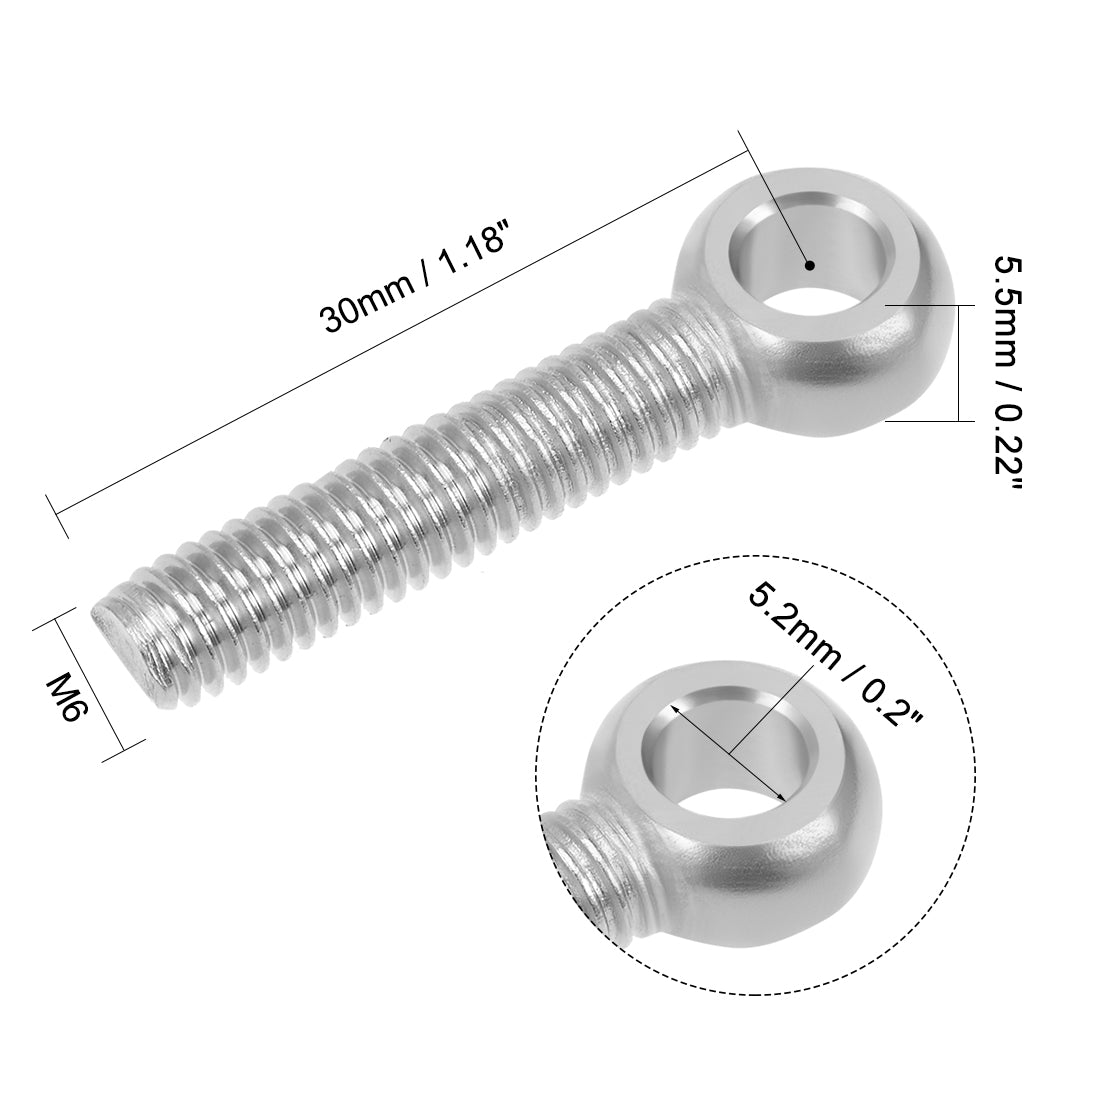 uxcell Uxcell M6 x 30mm Machinery Shoulder Swing Lifting Eye Bolt 304 Stainless Steel Metric Thread 2pcs